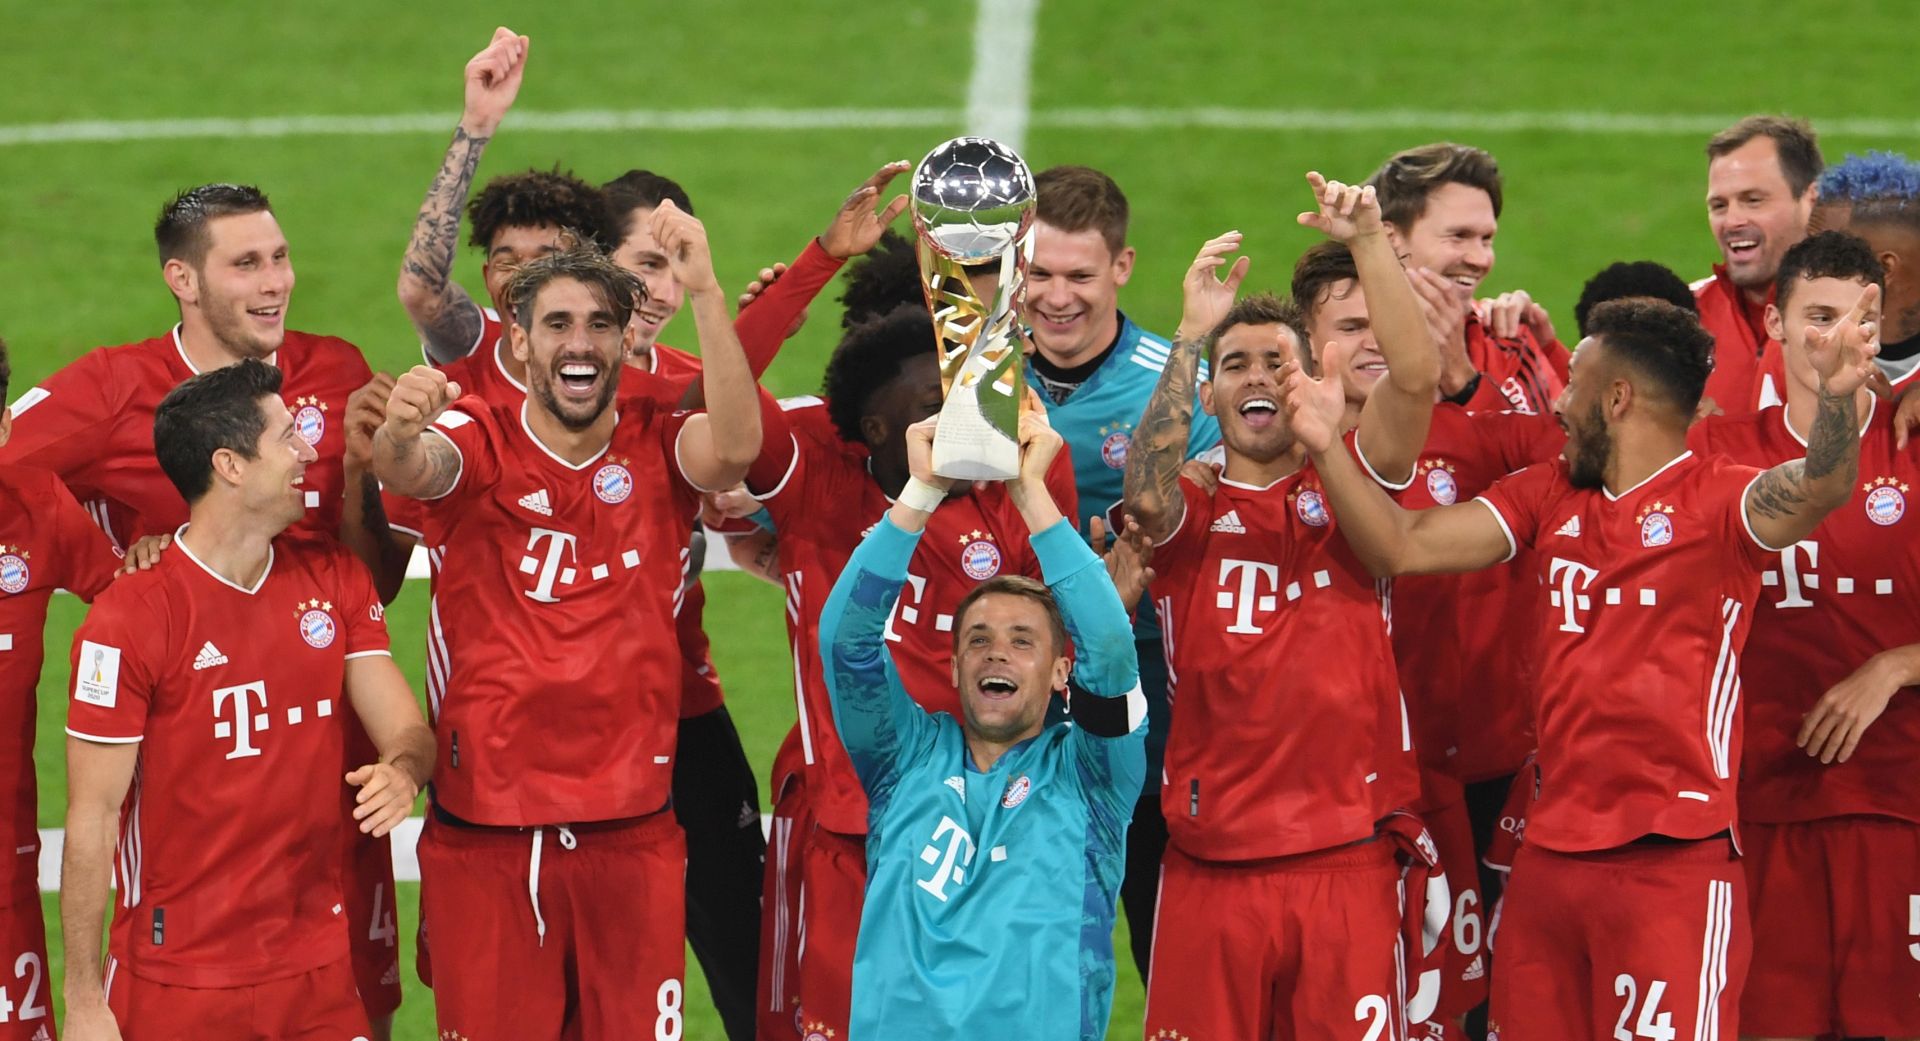 epa08710313 Bayern Munich's goalkeeper Manuel Neuer (C) lifts the trophy as his teammates celebrate after winning the German DFL Supercup soccer match between Bayern Munich and Borussia Dortmund in Munich, Germany, 30 September 2020.  EPA/ANDREAS GEBERT / POOL CONDITIONS - ATTENTION: The DFL regulations prohibit any use of photographs as image sequences and/or quasi-video.